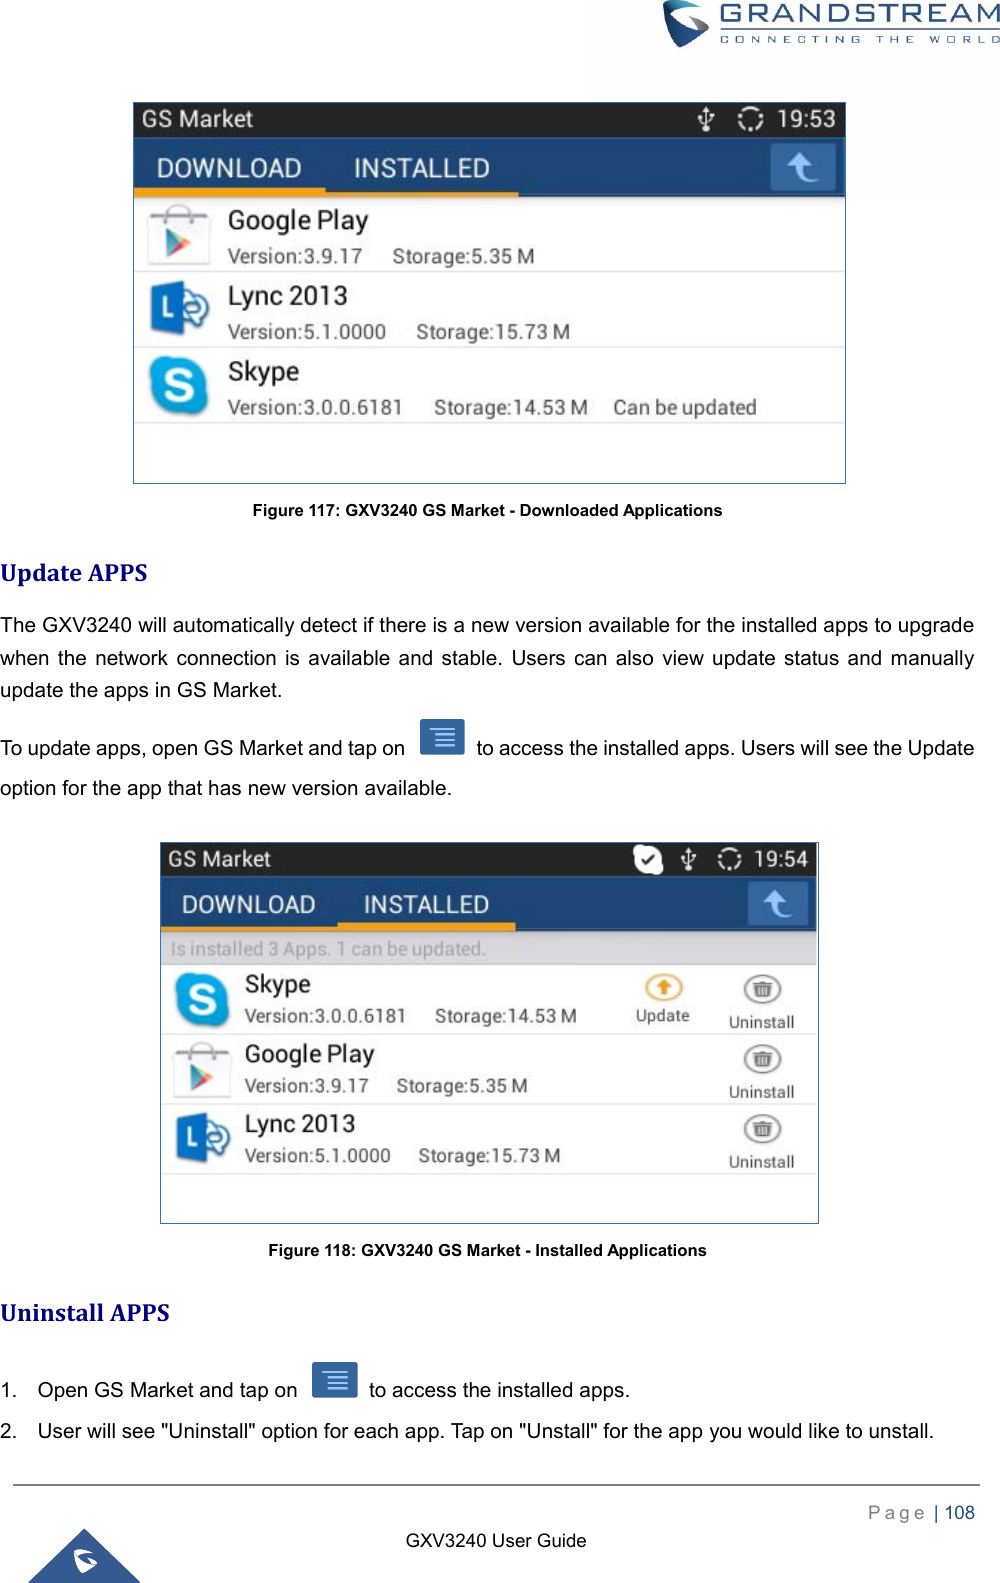    P a g e  | 108    GXV3240 User Guide   Figure 117: GXV3240 GS Market - Downloaded Applications Update APPS The GXV3240 will automatically detect if there is a new version available for the installed apps to upgrade when the  network  connection is  available  and  stable.  Users  can also  view  update status and  manually update the apps in GS Market. To update apps, open GS Market and tap on    to access the installed apps. Users will see the Update option for the app that has new version available.   Figure 118: GXV3240 GS Market - Installed Applications Uninstall APPS 1.  Open GS Market and tap on    to access the installed apps. 2.  User will see &quot;Uninstall&quot; option for each app. Tap on &quot;Unstall&quot; for the app you would like to unstall. 